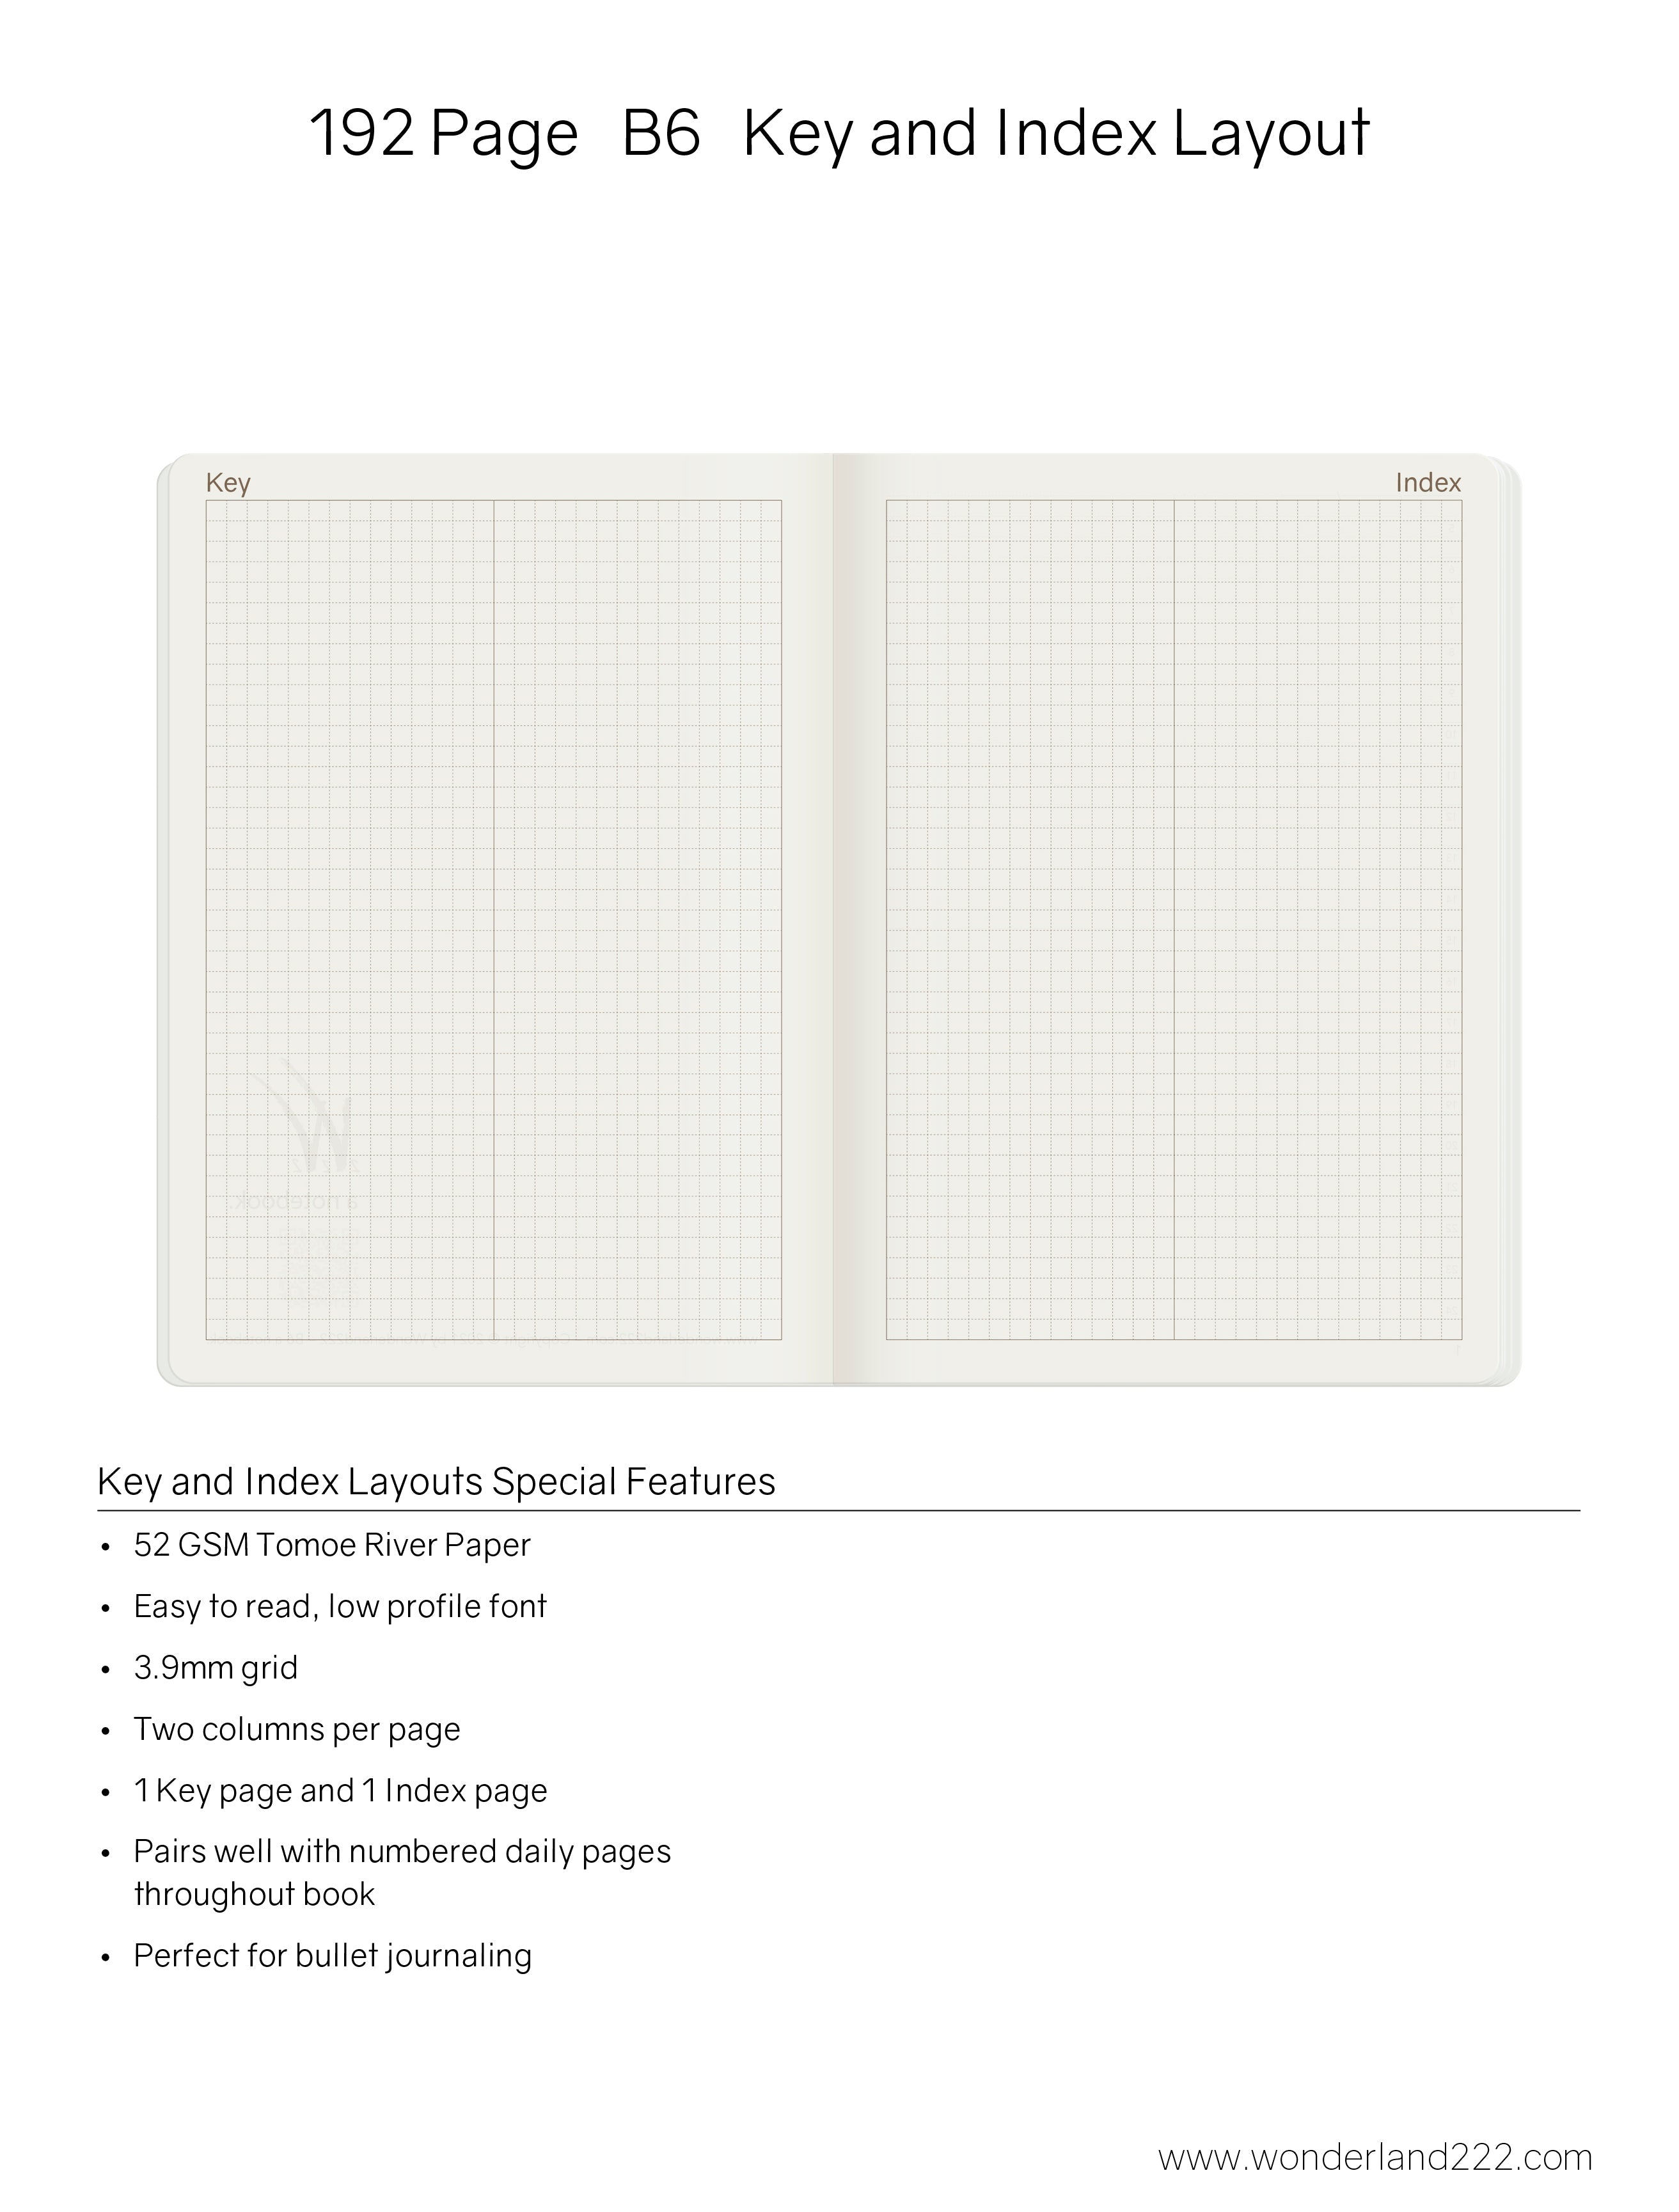 IMPERFECT | B6 Notebook (192 pages) - 2022 Edition